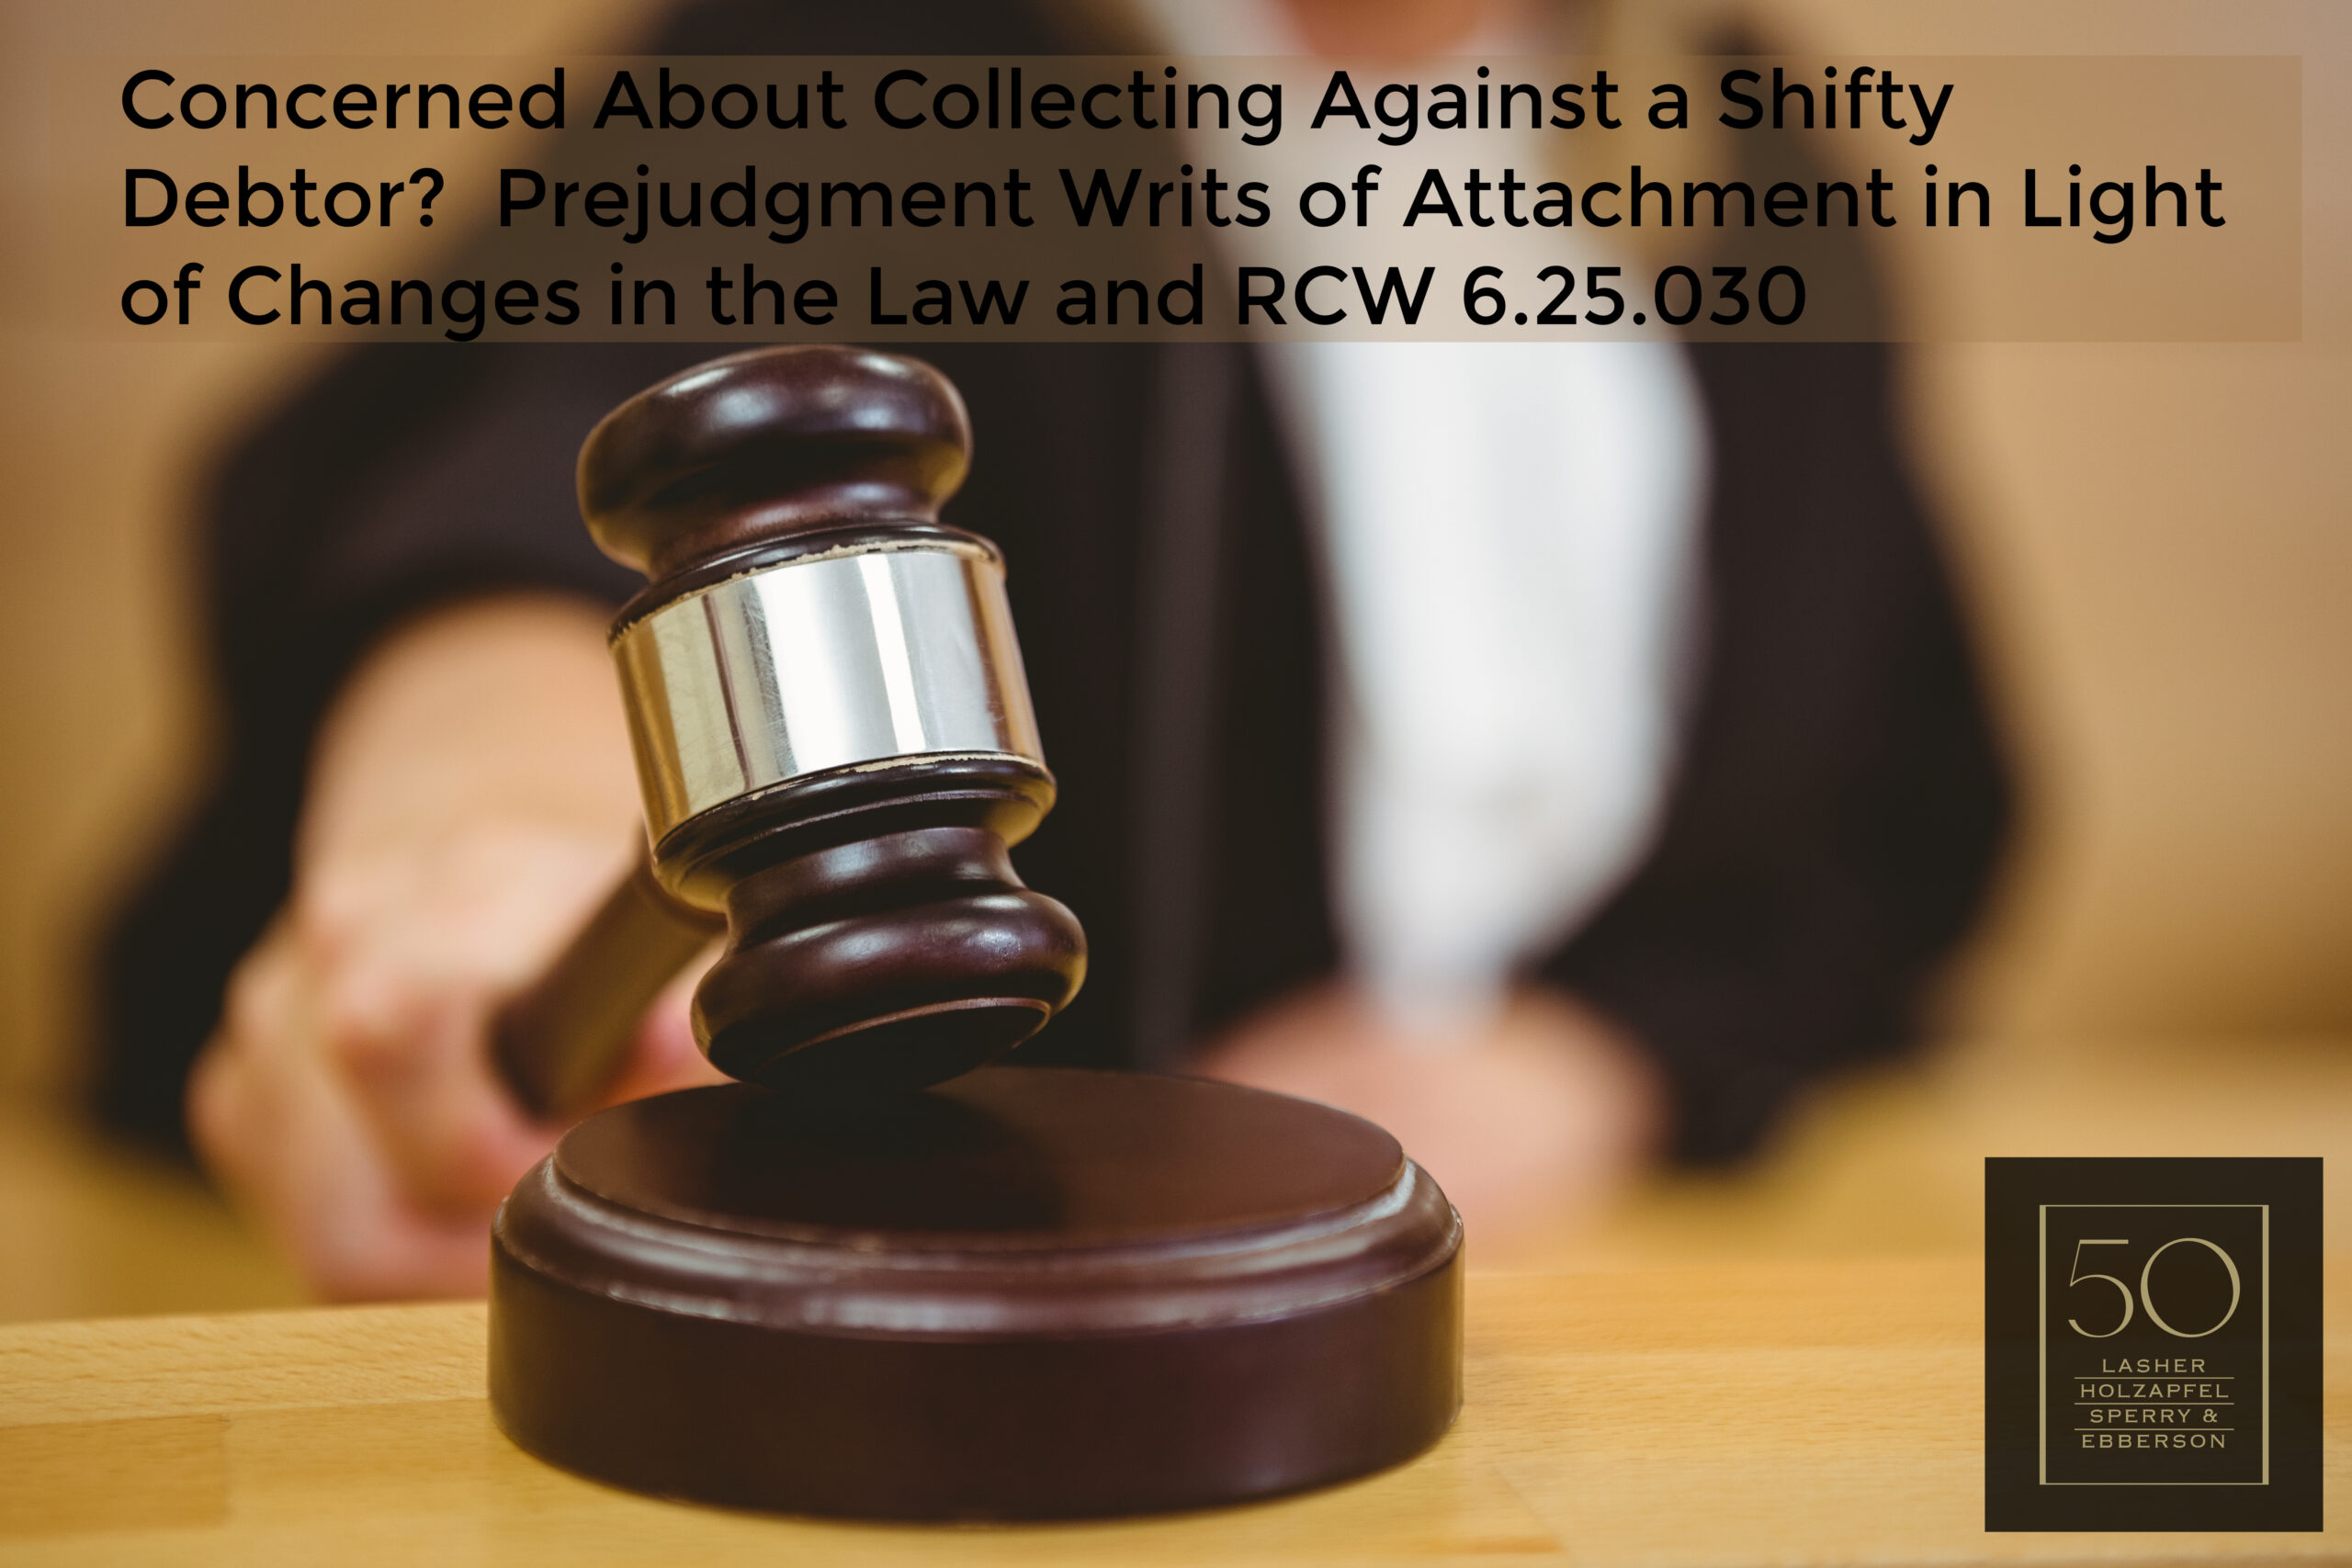 Concerned About Collecting Against a Shifty Debtor? Prejudgment Writs of Attachment in Light of Changes in the Law and RCW 6.25.030